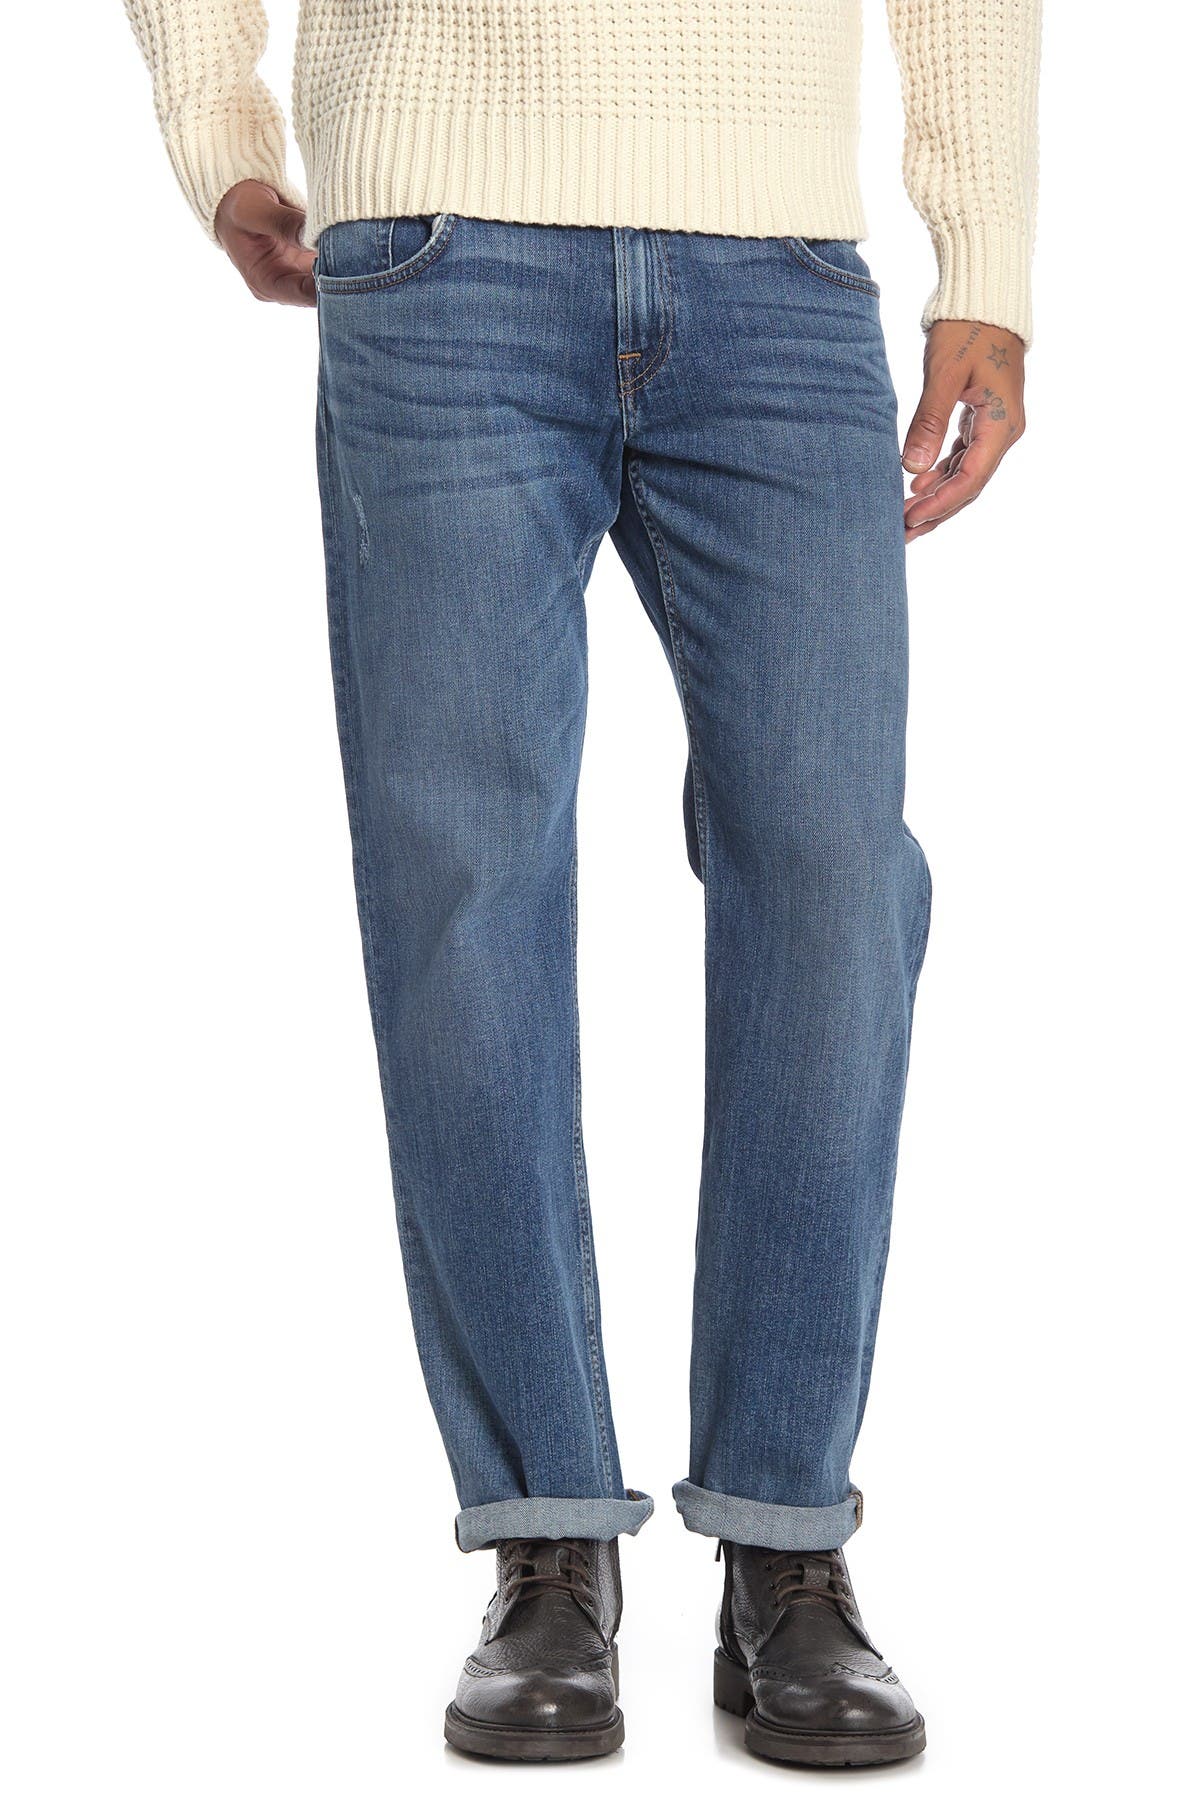 7 for all mankind austyn relaxed fit jeans